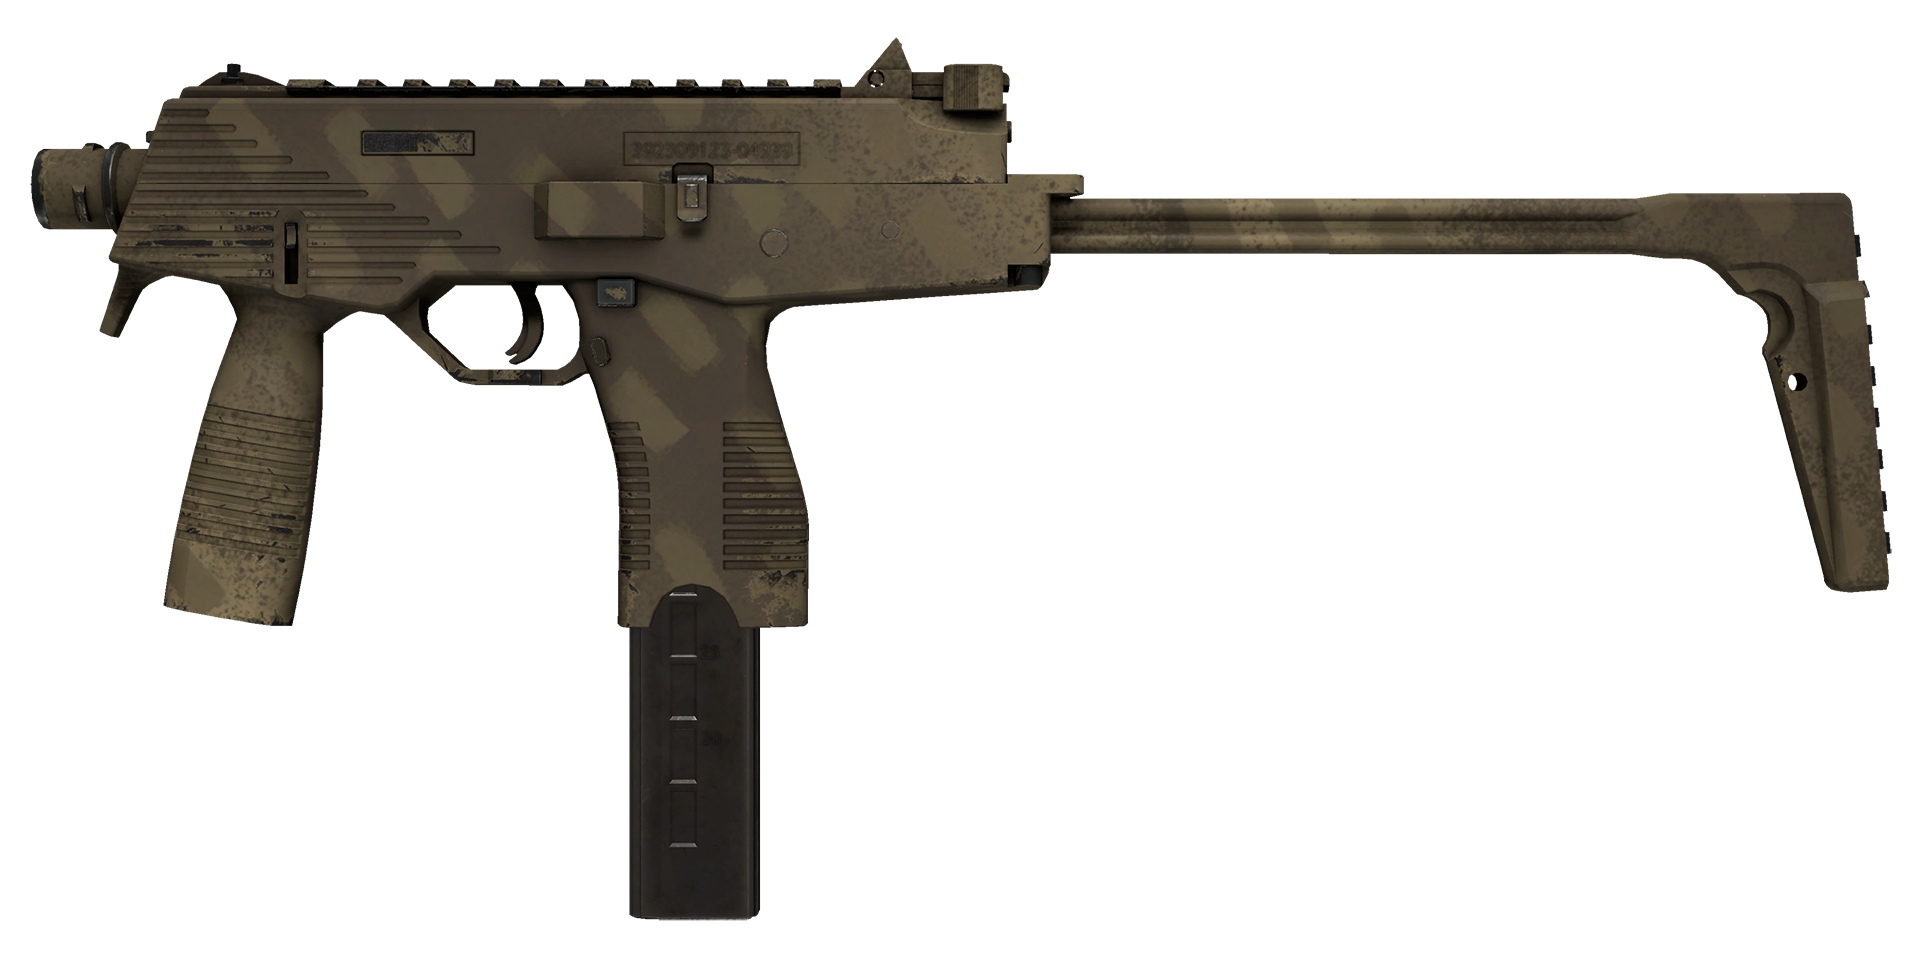 PP-Bizon Sand Dashed cs go skin instal the last version for iphone